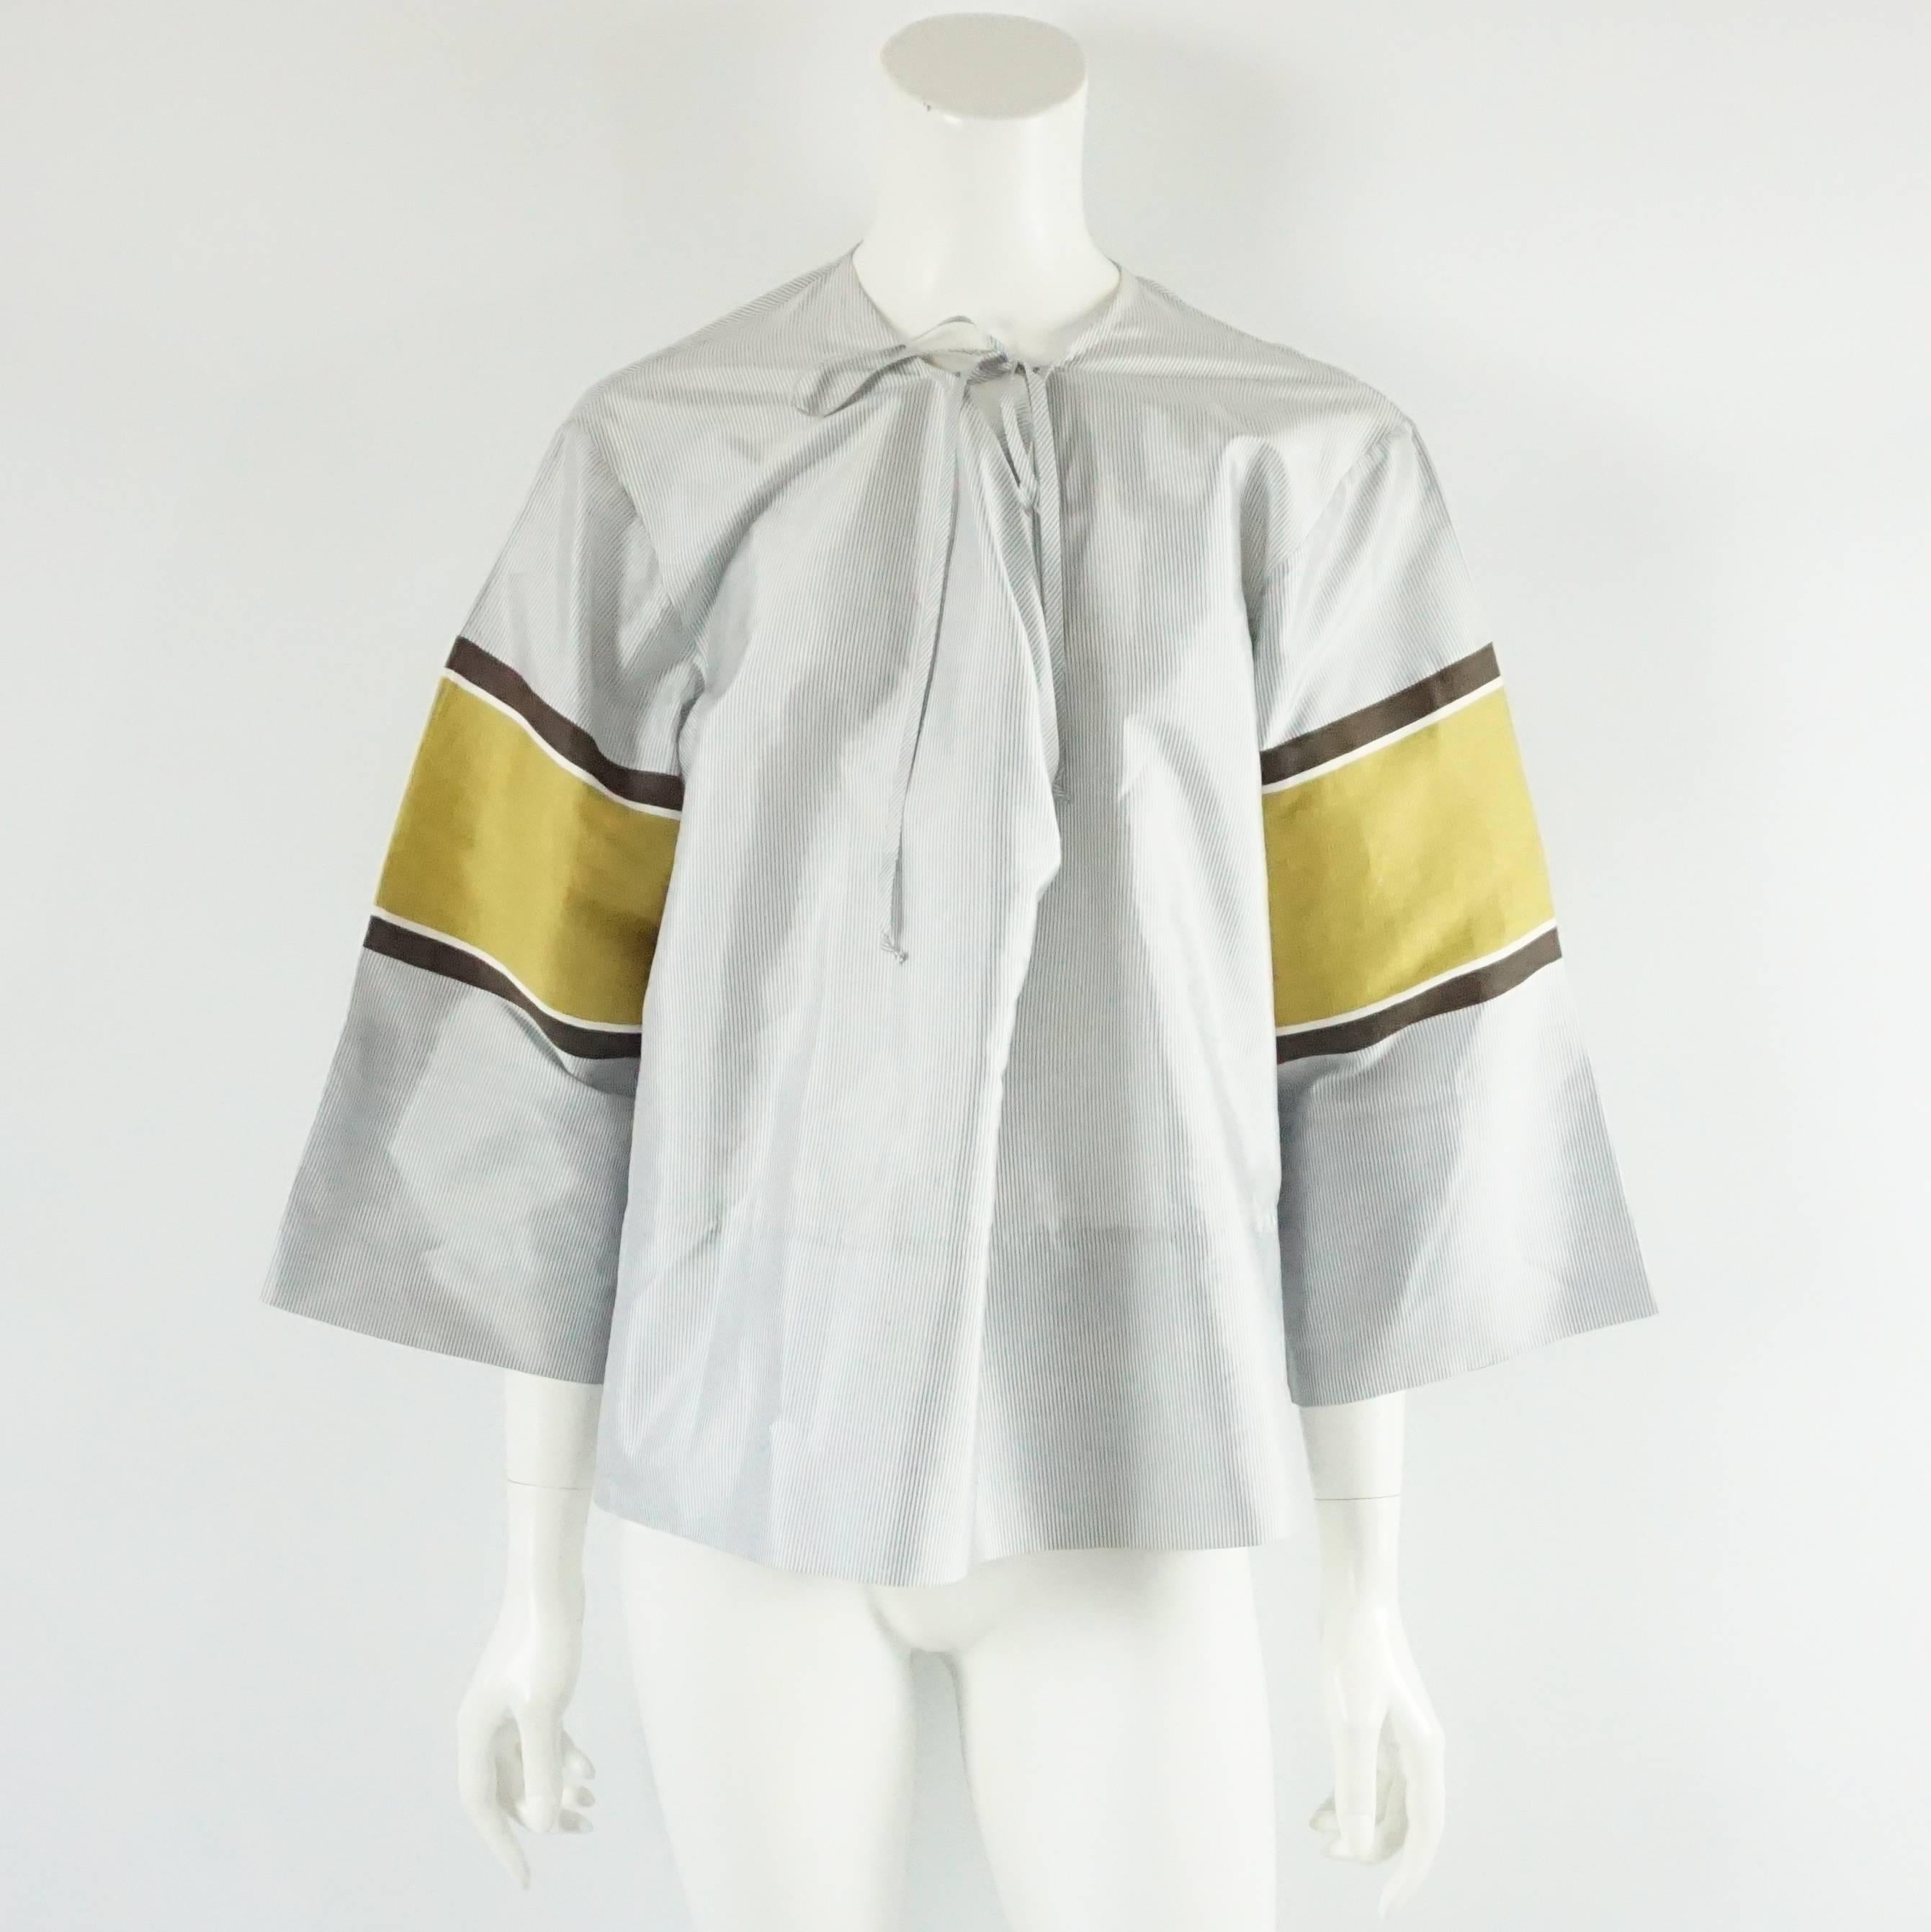 This Bottega Veneta silk top has a loose design. It has blue and white stripes all over and on the sleeves there is mustard and brown detailing. There are ties on the neckline that can be tied to give more structure to the front. This top is in very